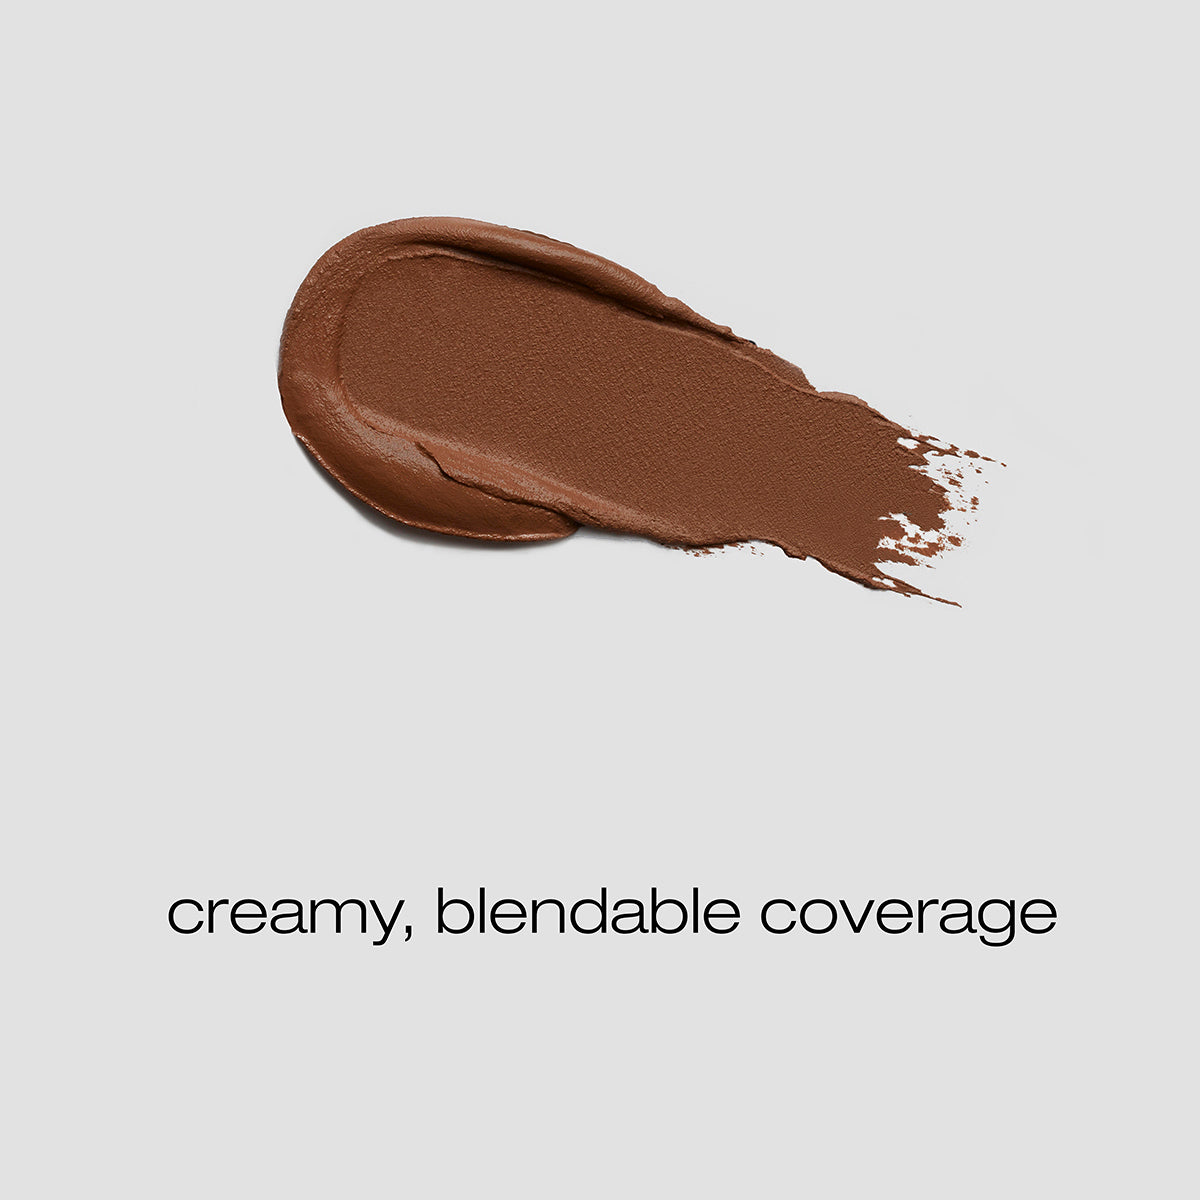 Spread of the Bourbobn concealer with description of creamy, blendable coverage